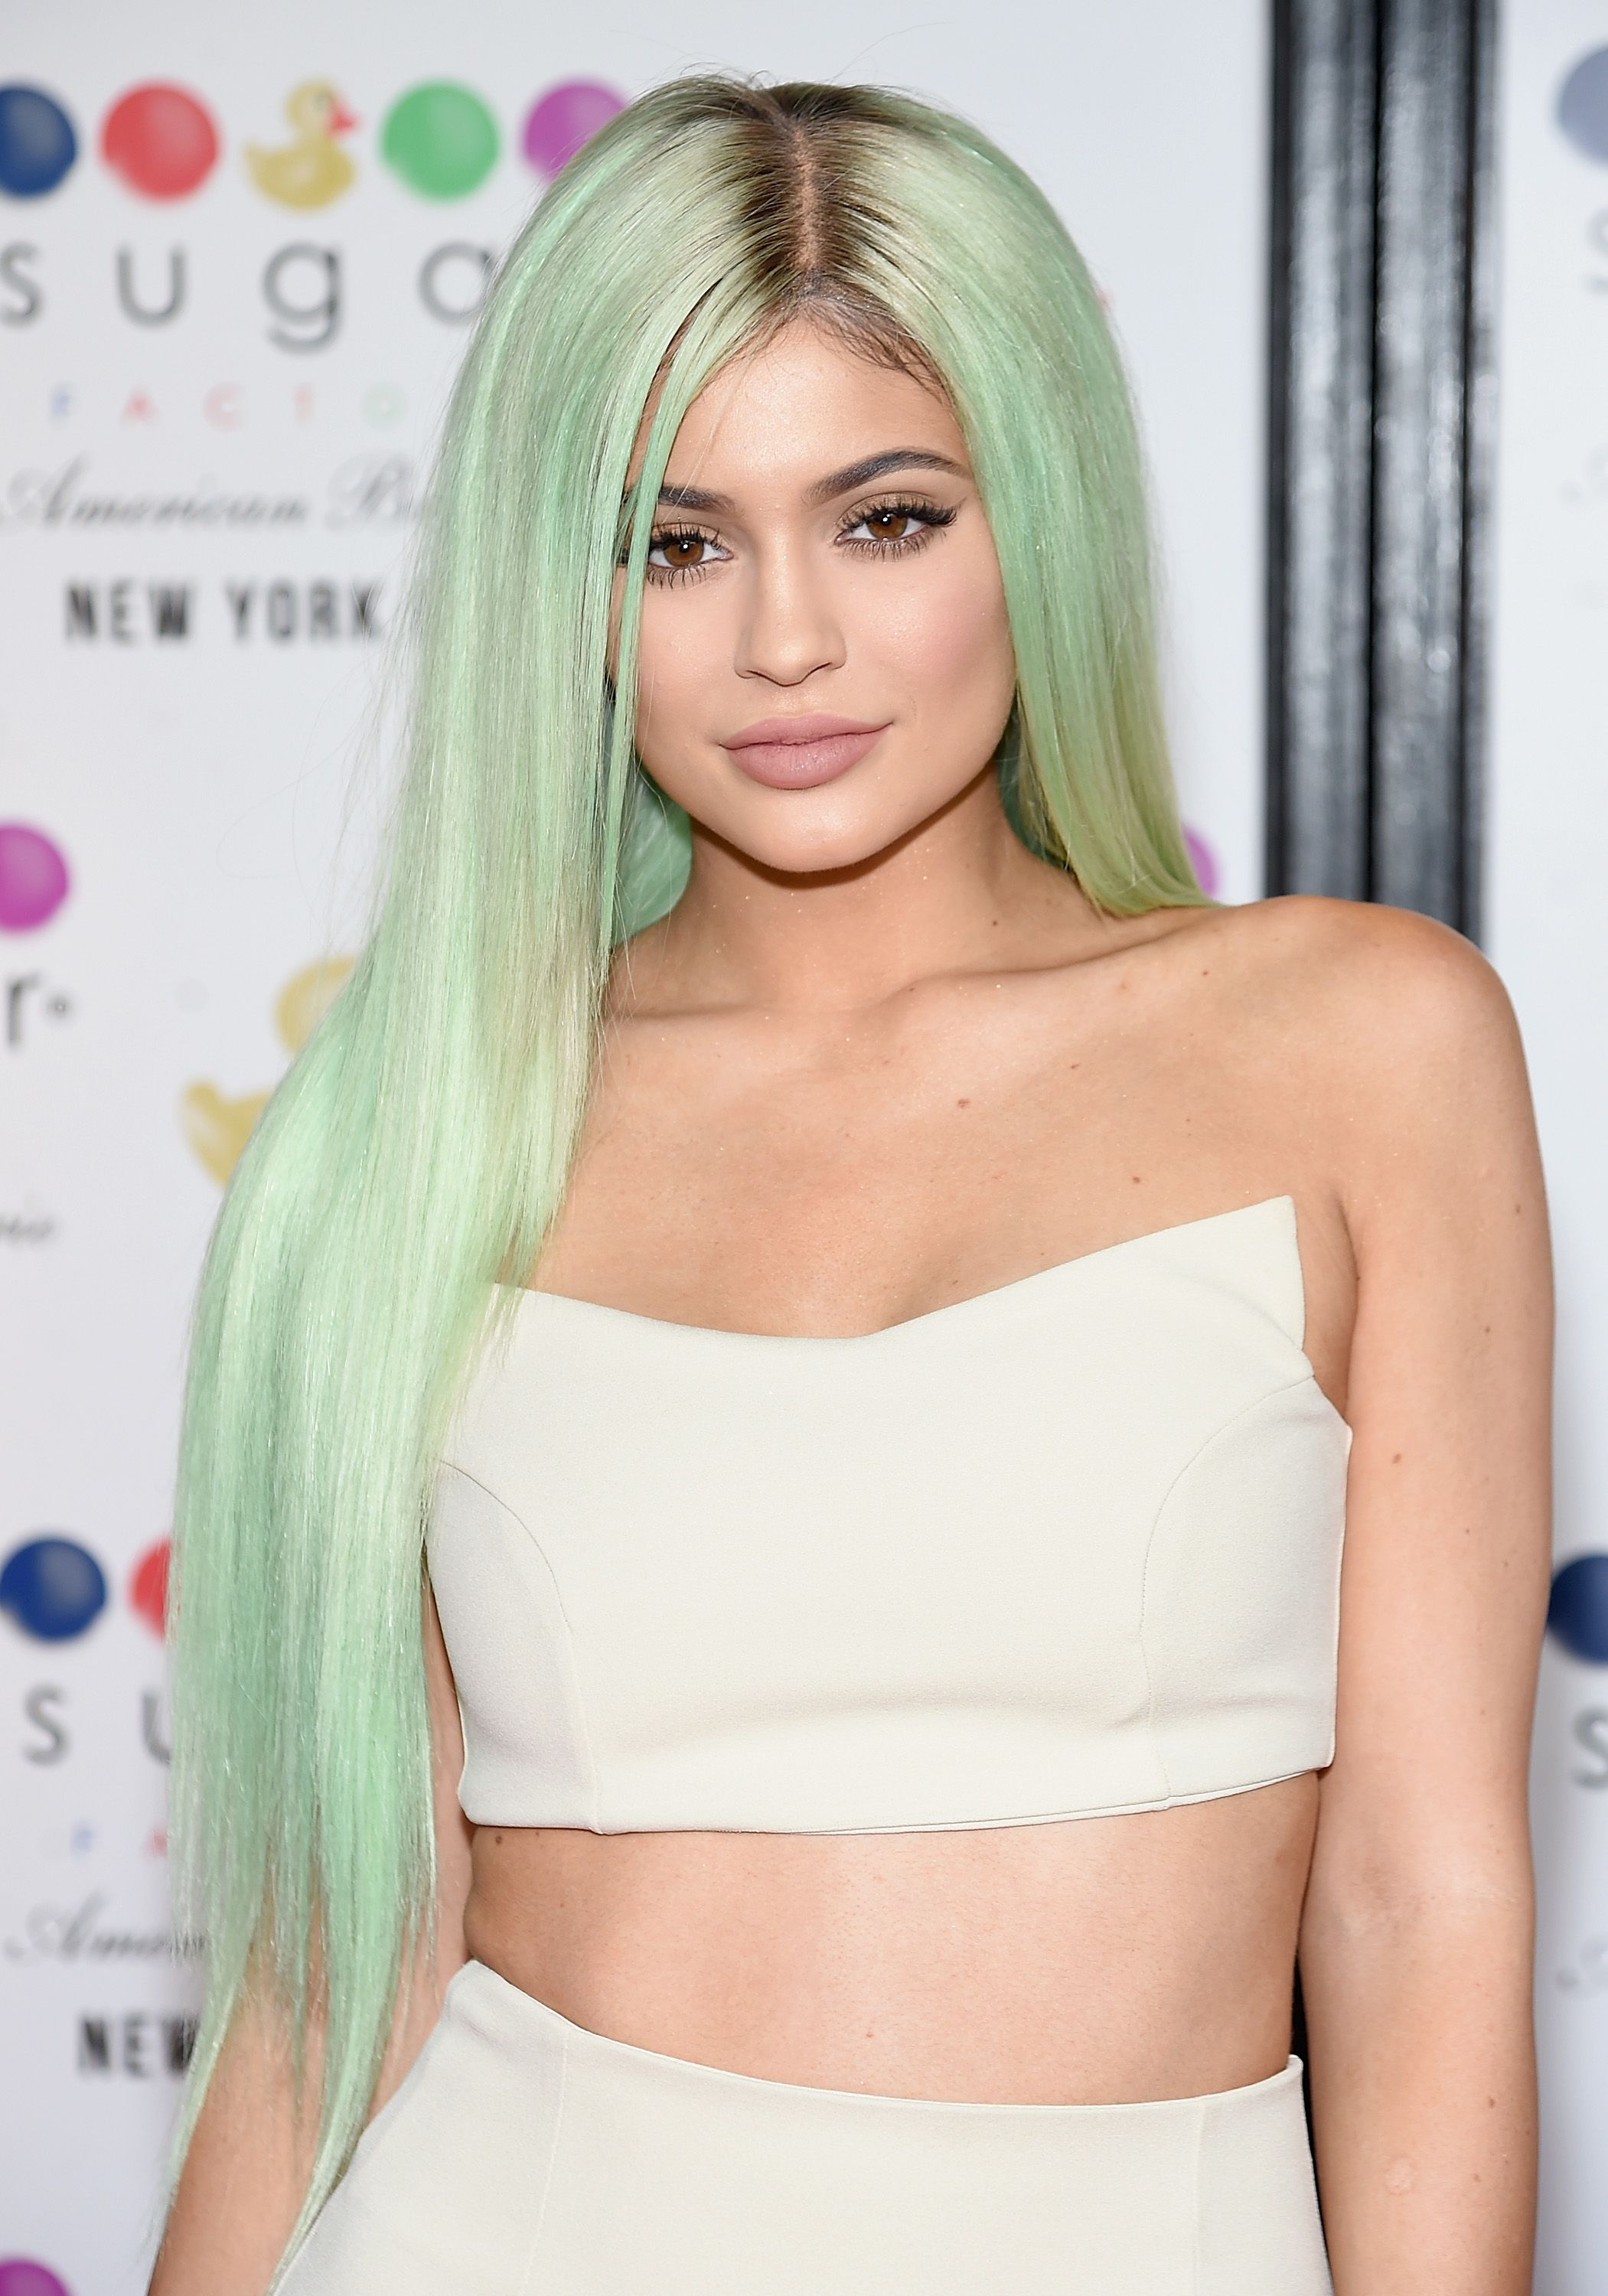 Kylie Jenner attending the opening of the Sugar Factory American Brasserie on September 16, 2015. | Photo: Getty Images